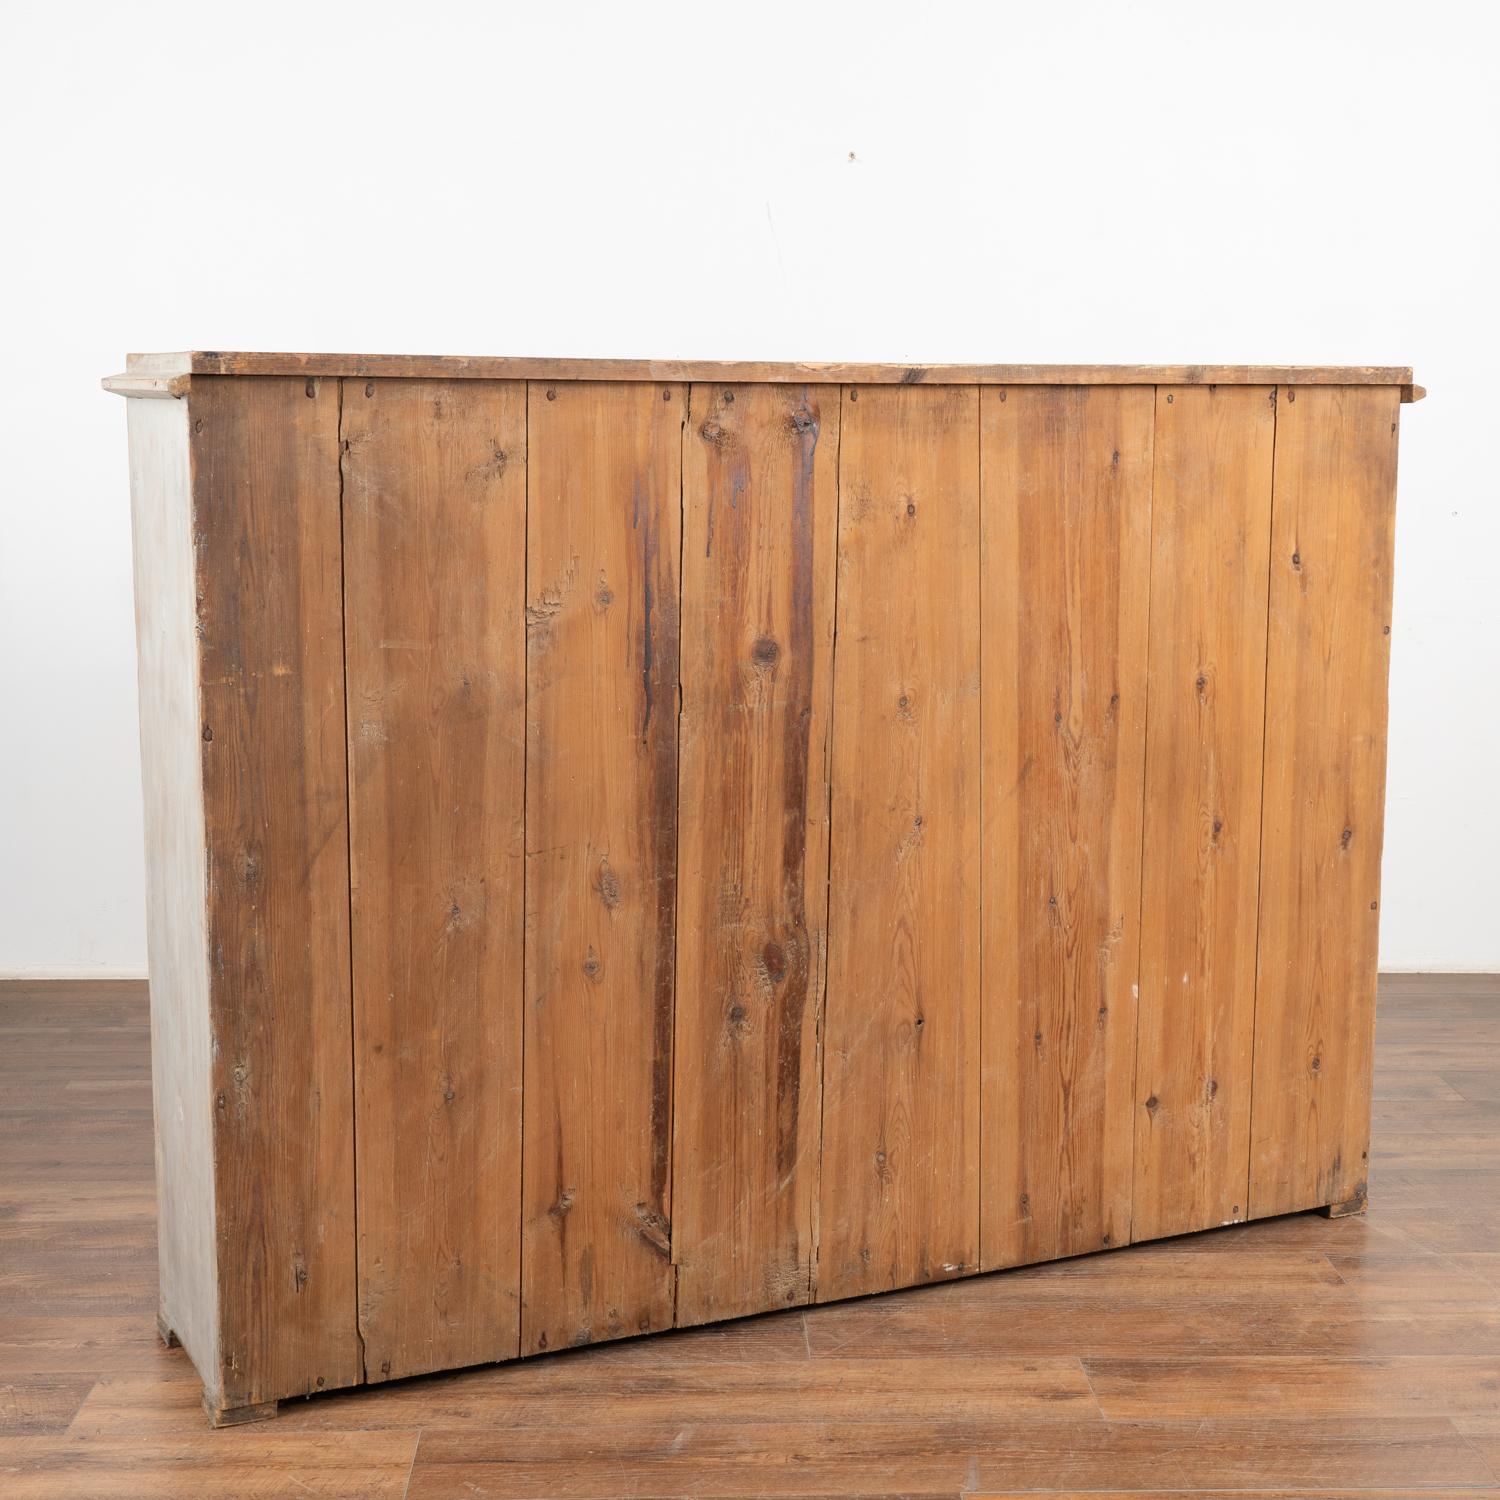 Narrow Original Painted Swedish Sideboard Console, circa 1820-40 For Sale 4